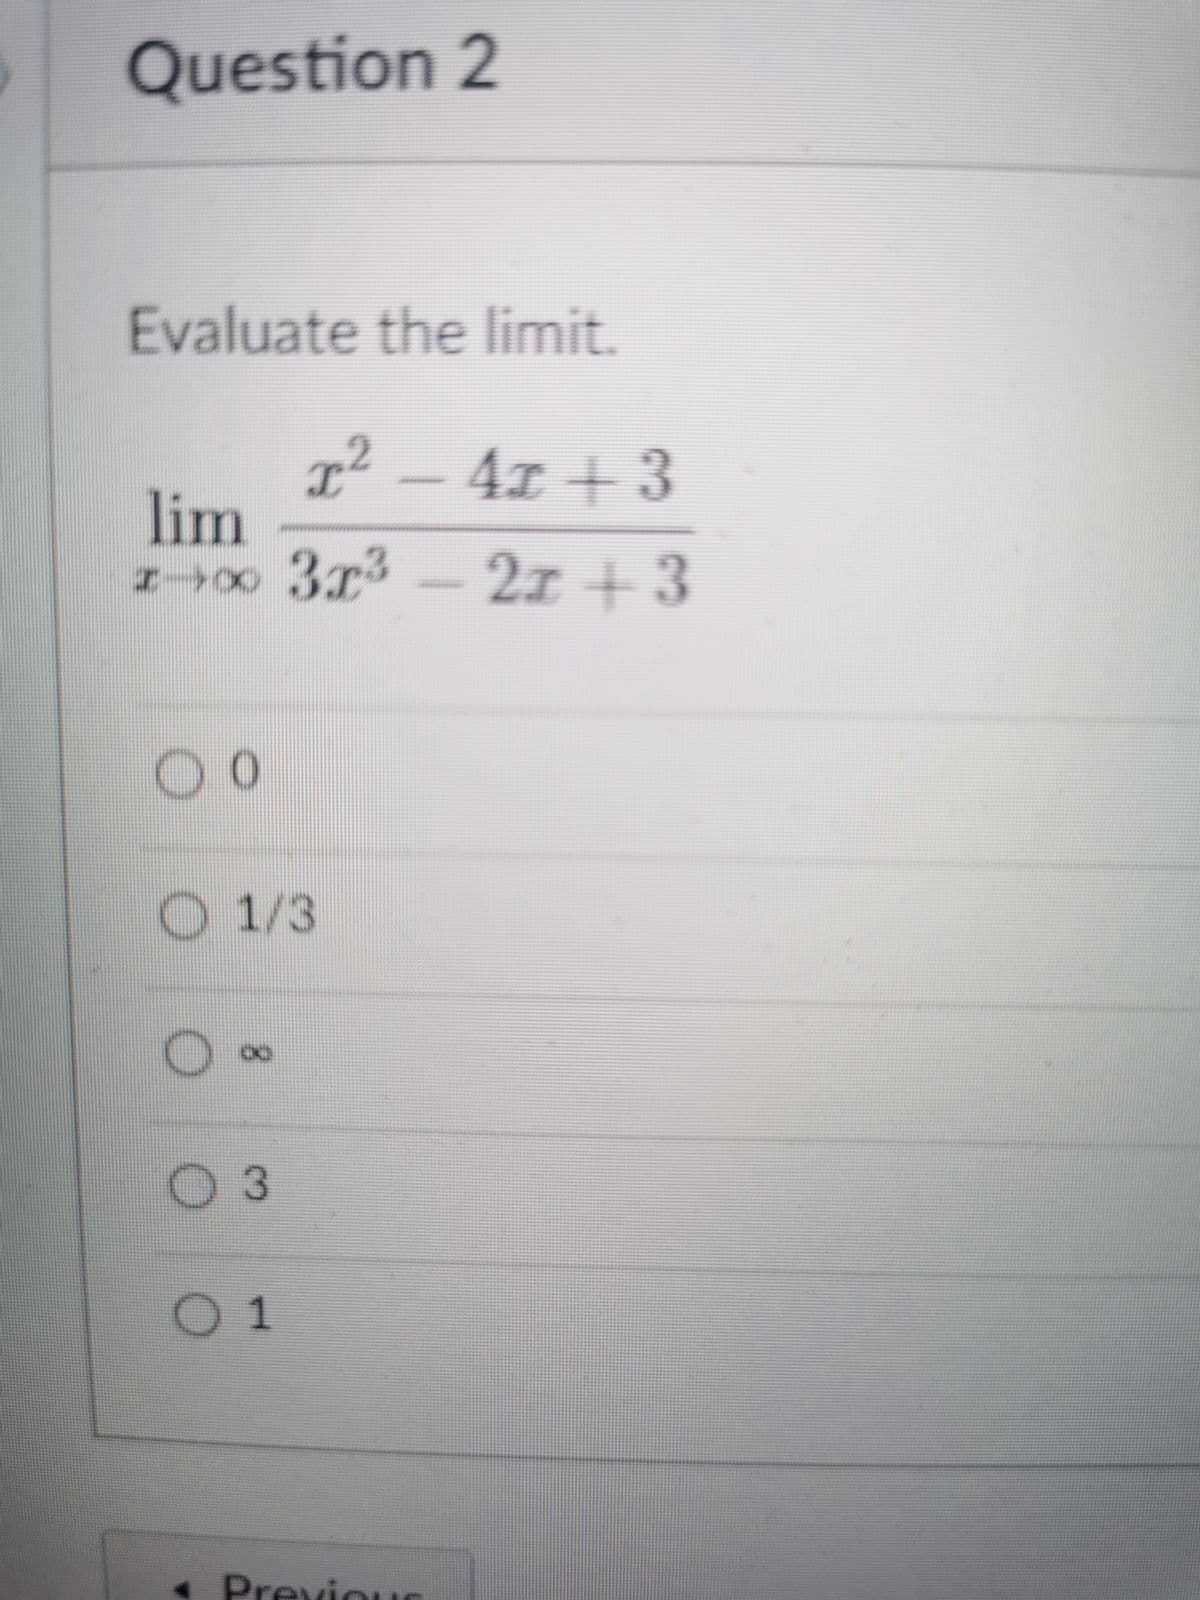 Question 2
Evaluate the limit.
T² – 4x + 3
lim
2x + 3
O 1/3
03
01
« PreviOUS
